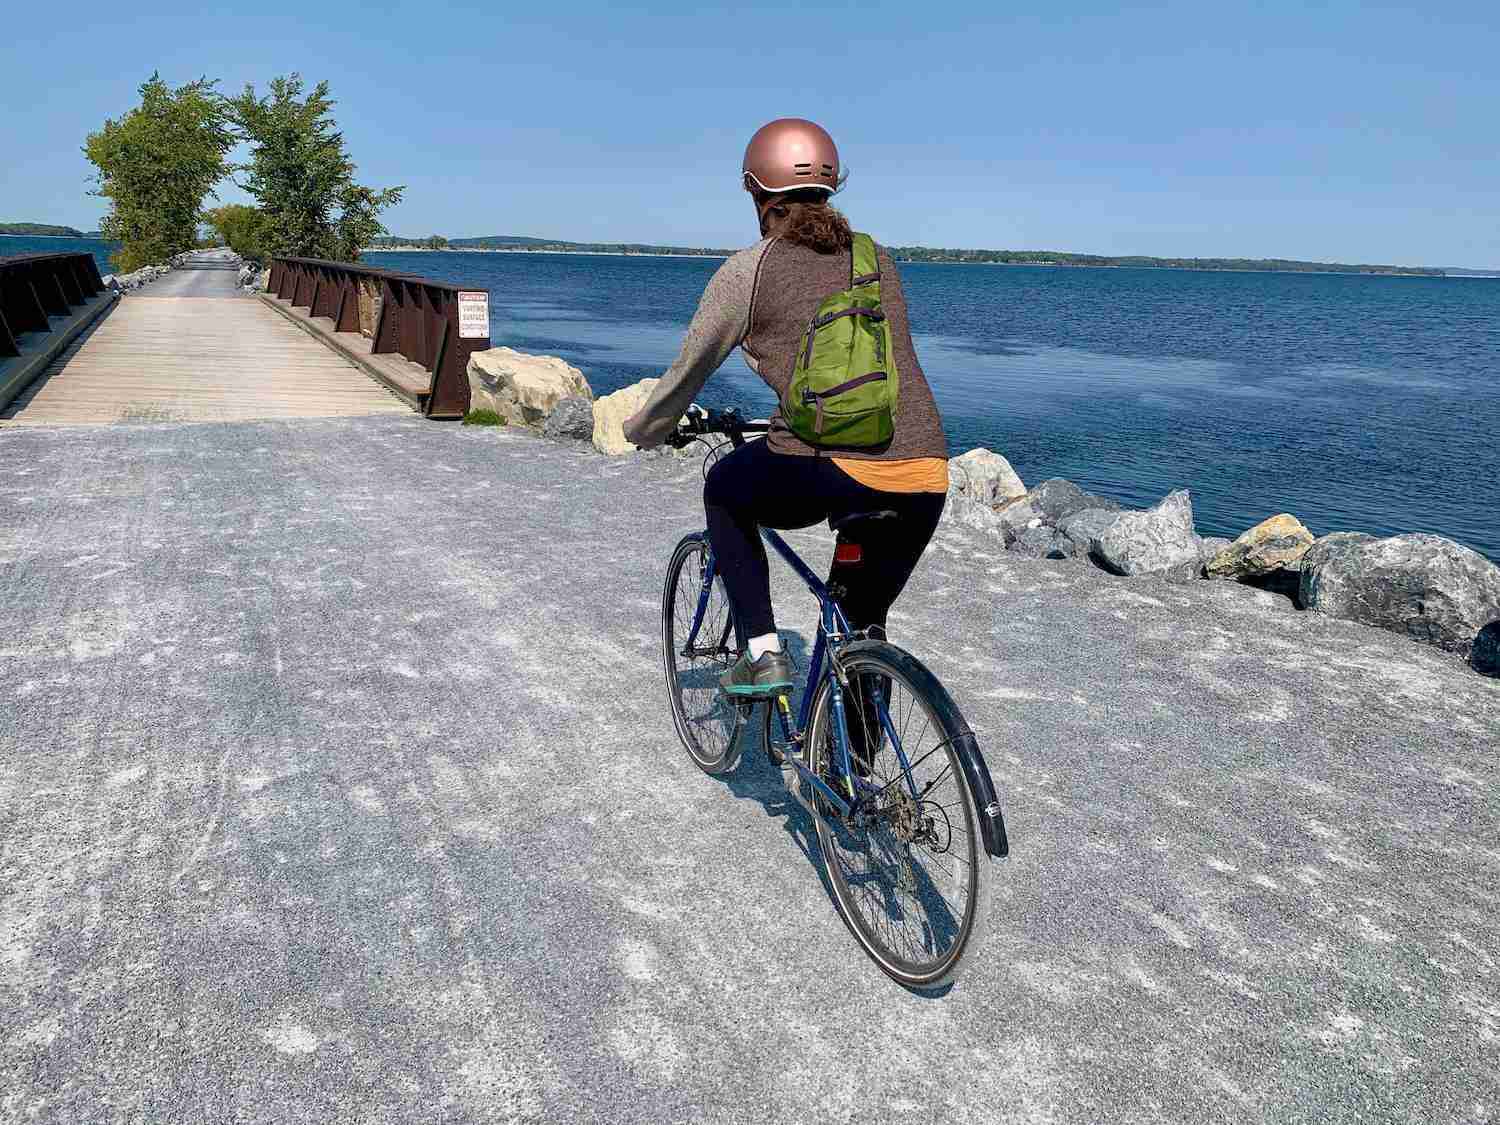 Woman riding bike on gravel causeway bike path in Vermont with Lake Champlain on right side side